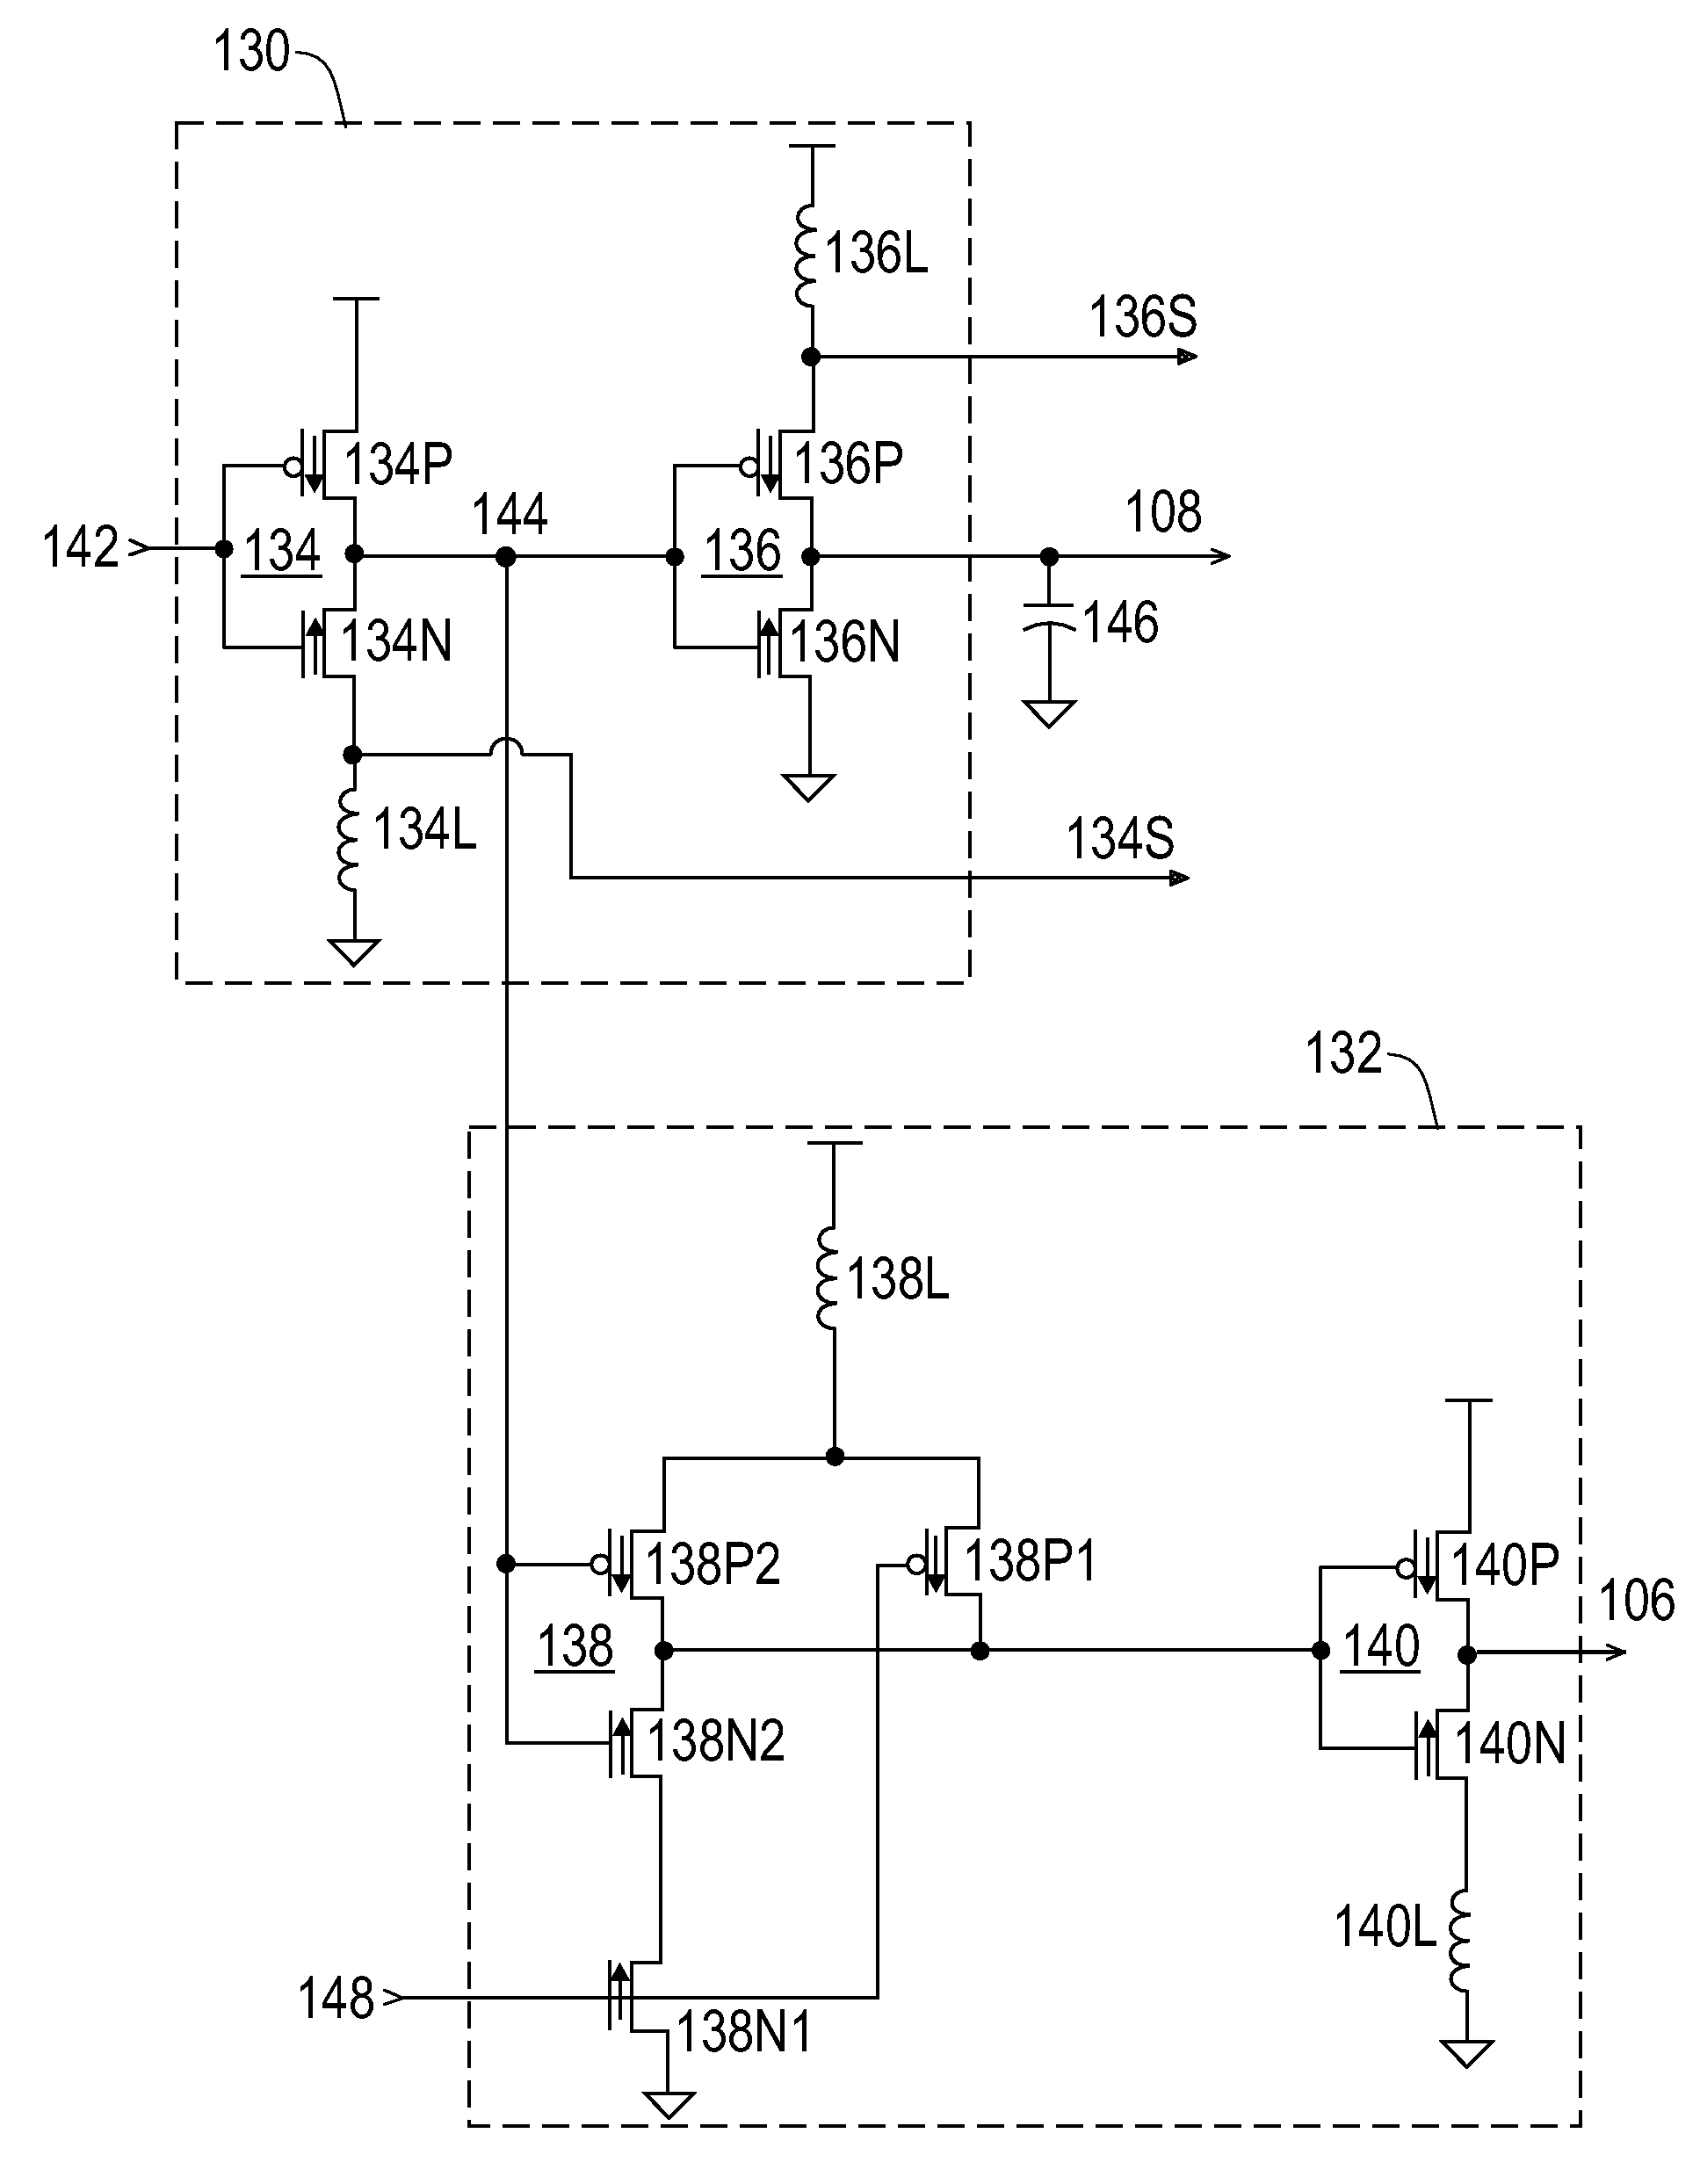 Local clock buffer (LCB) with asymmetric inductive peaking